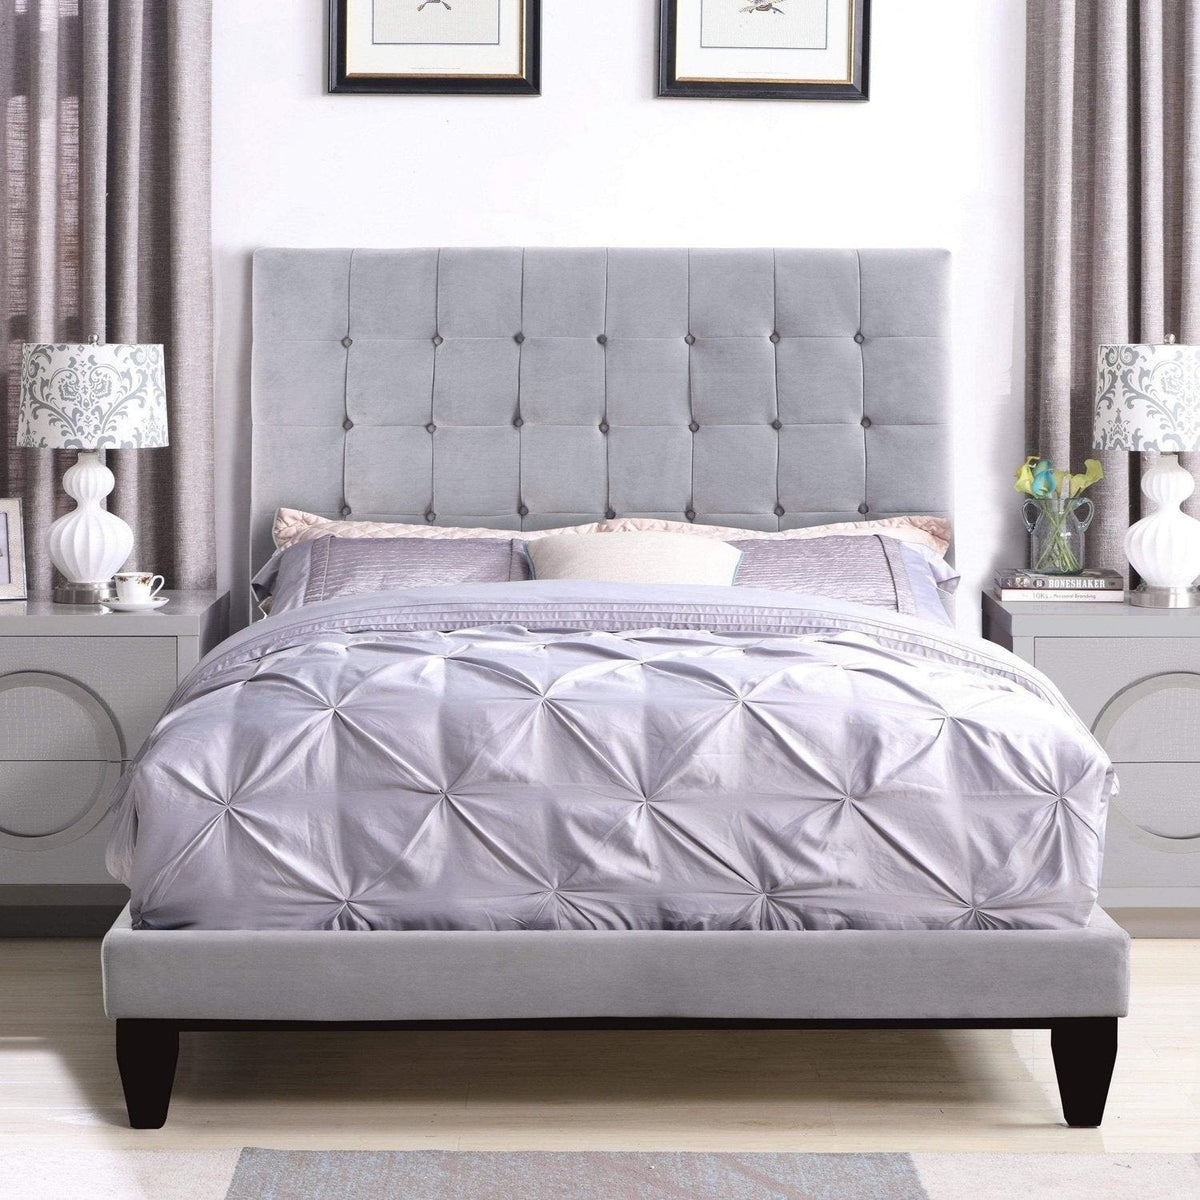 Iconic Home Beethoven Tufted Velvet Bed Frame With Headboard Light Grey